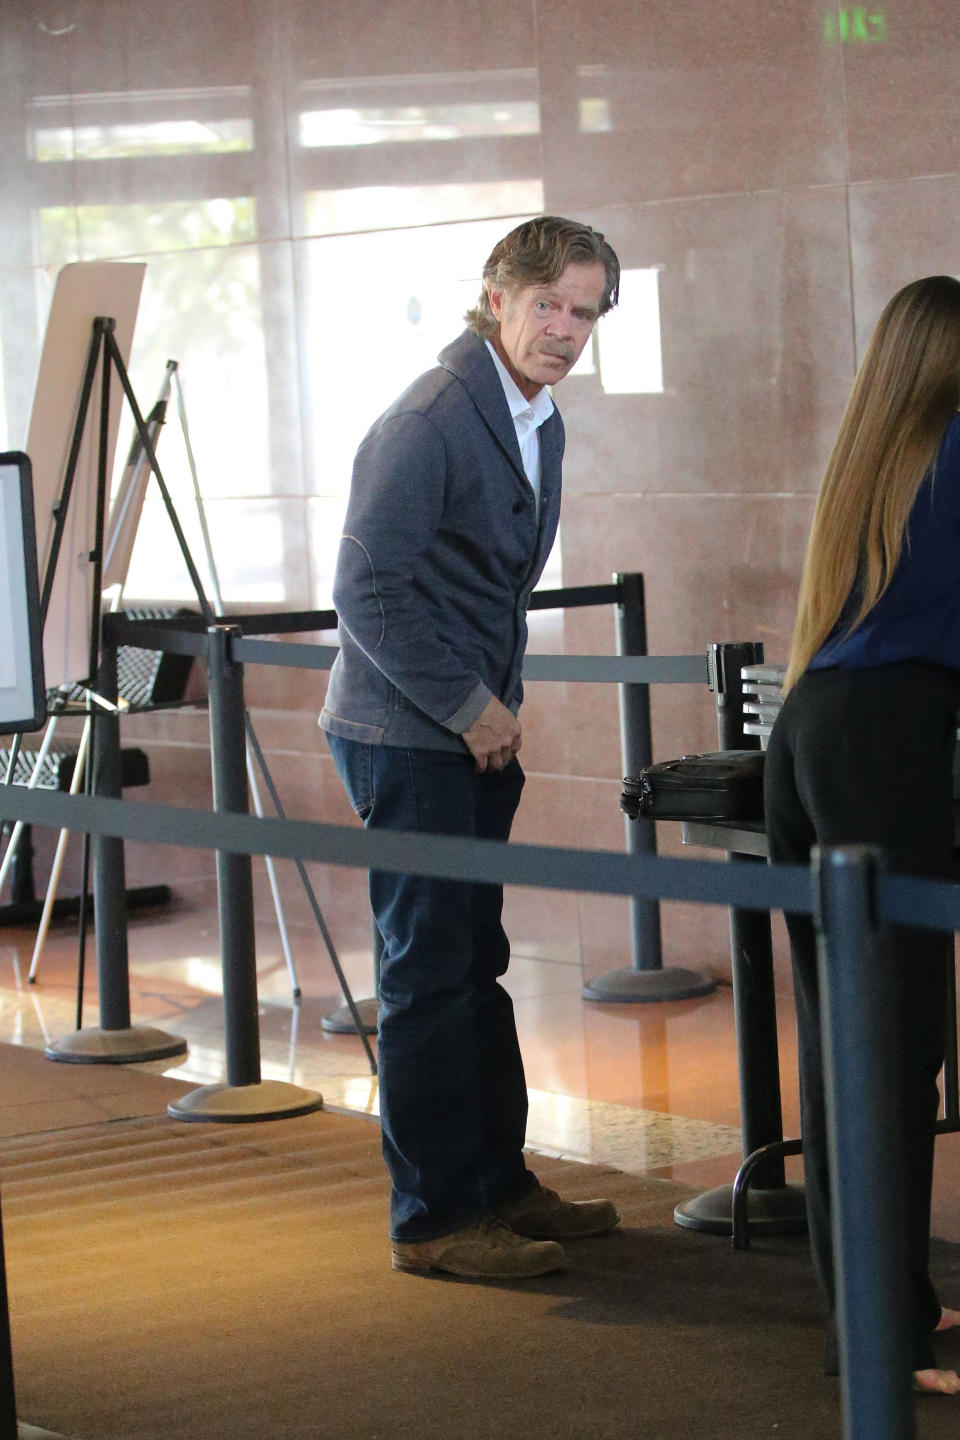 William H. Macy arrived at a federal building in Los Angeles where Huffman was being held for questioning. Source: Splash News